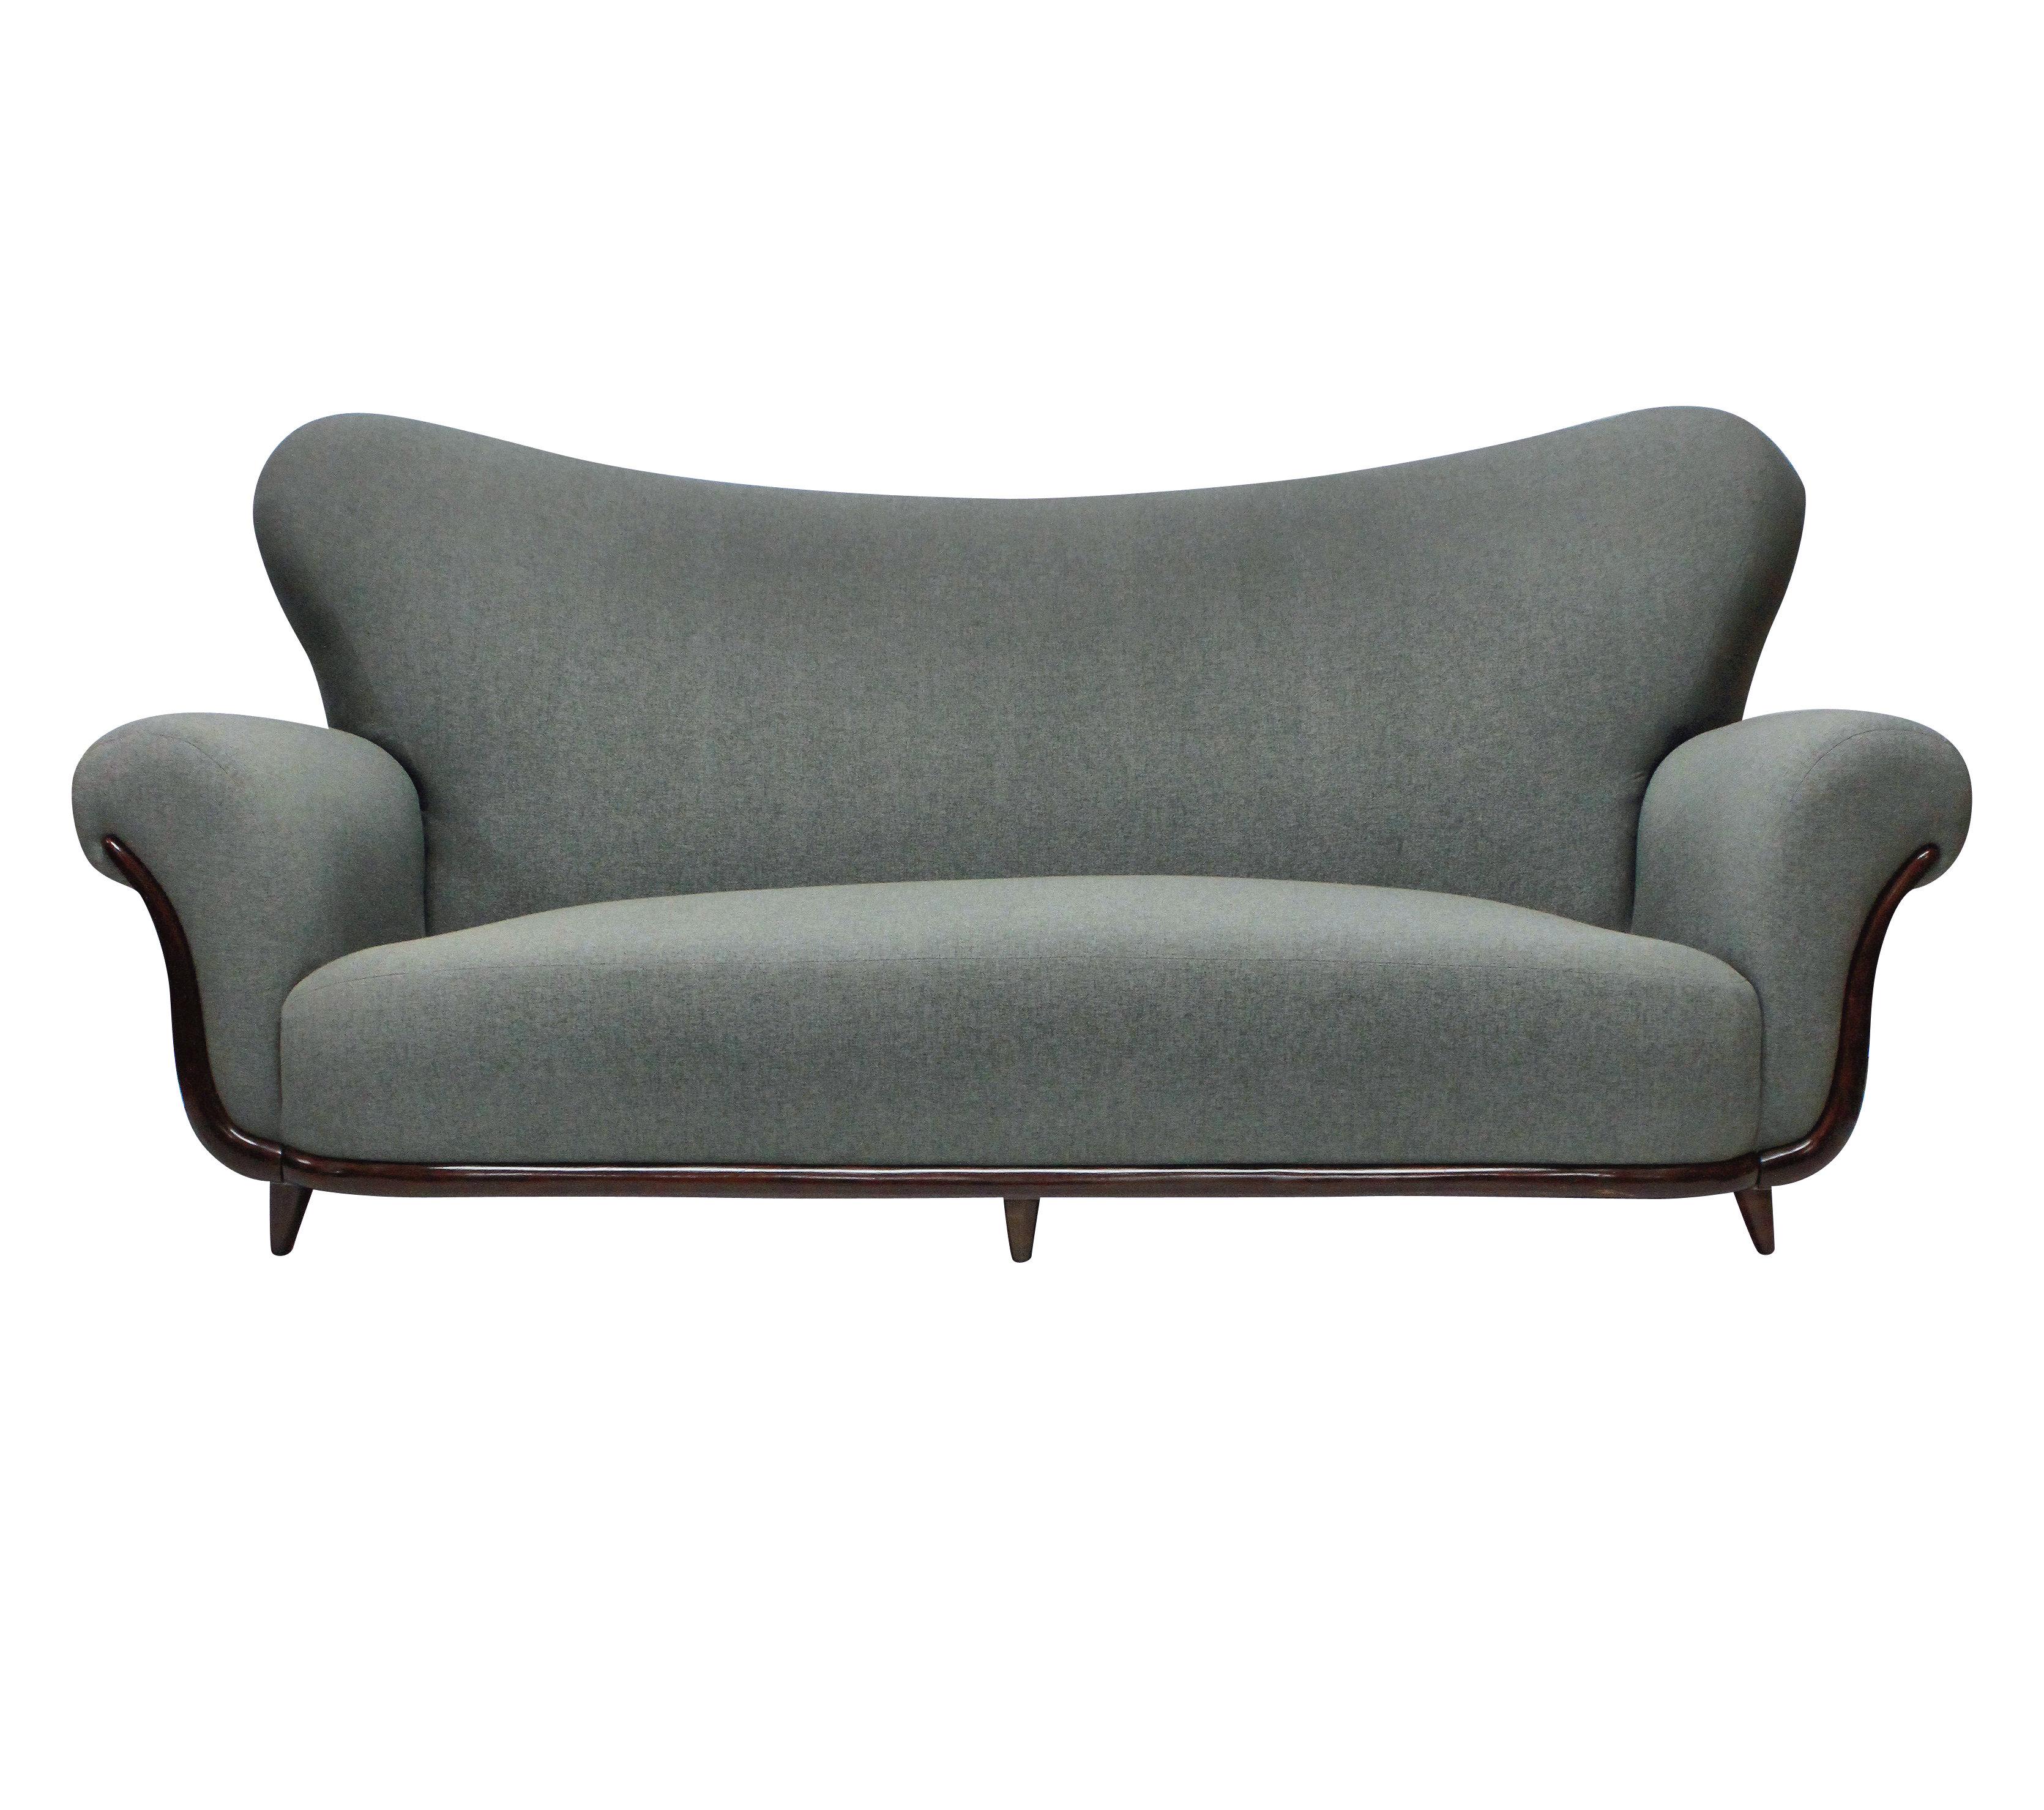 Italian Large Sculptural Sofa by Ulrich